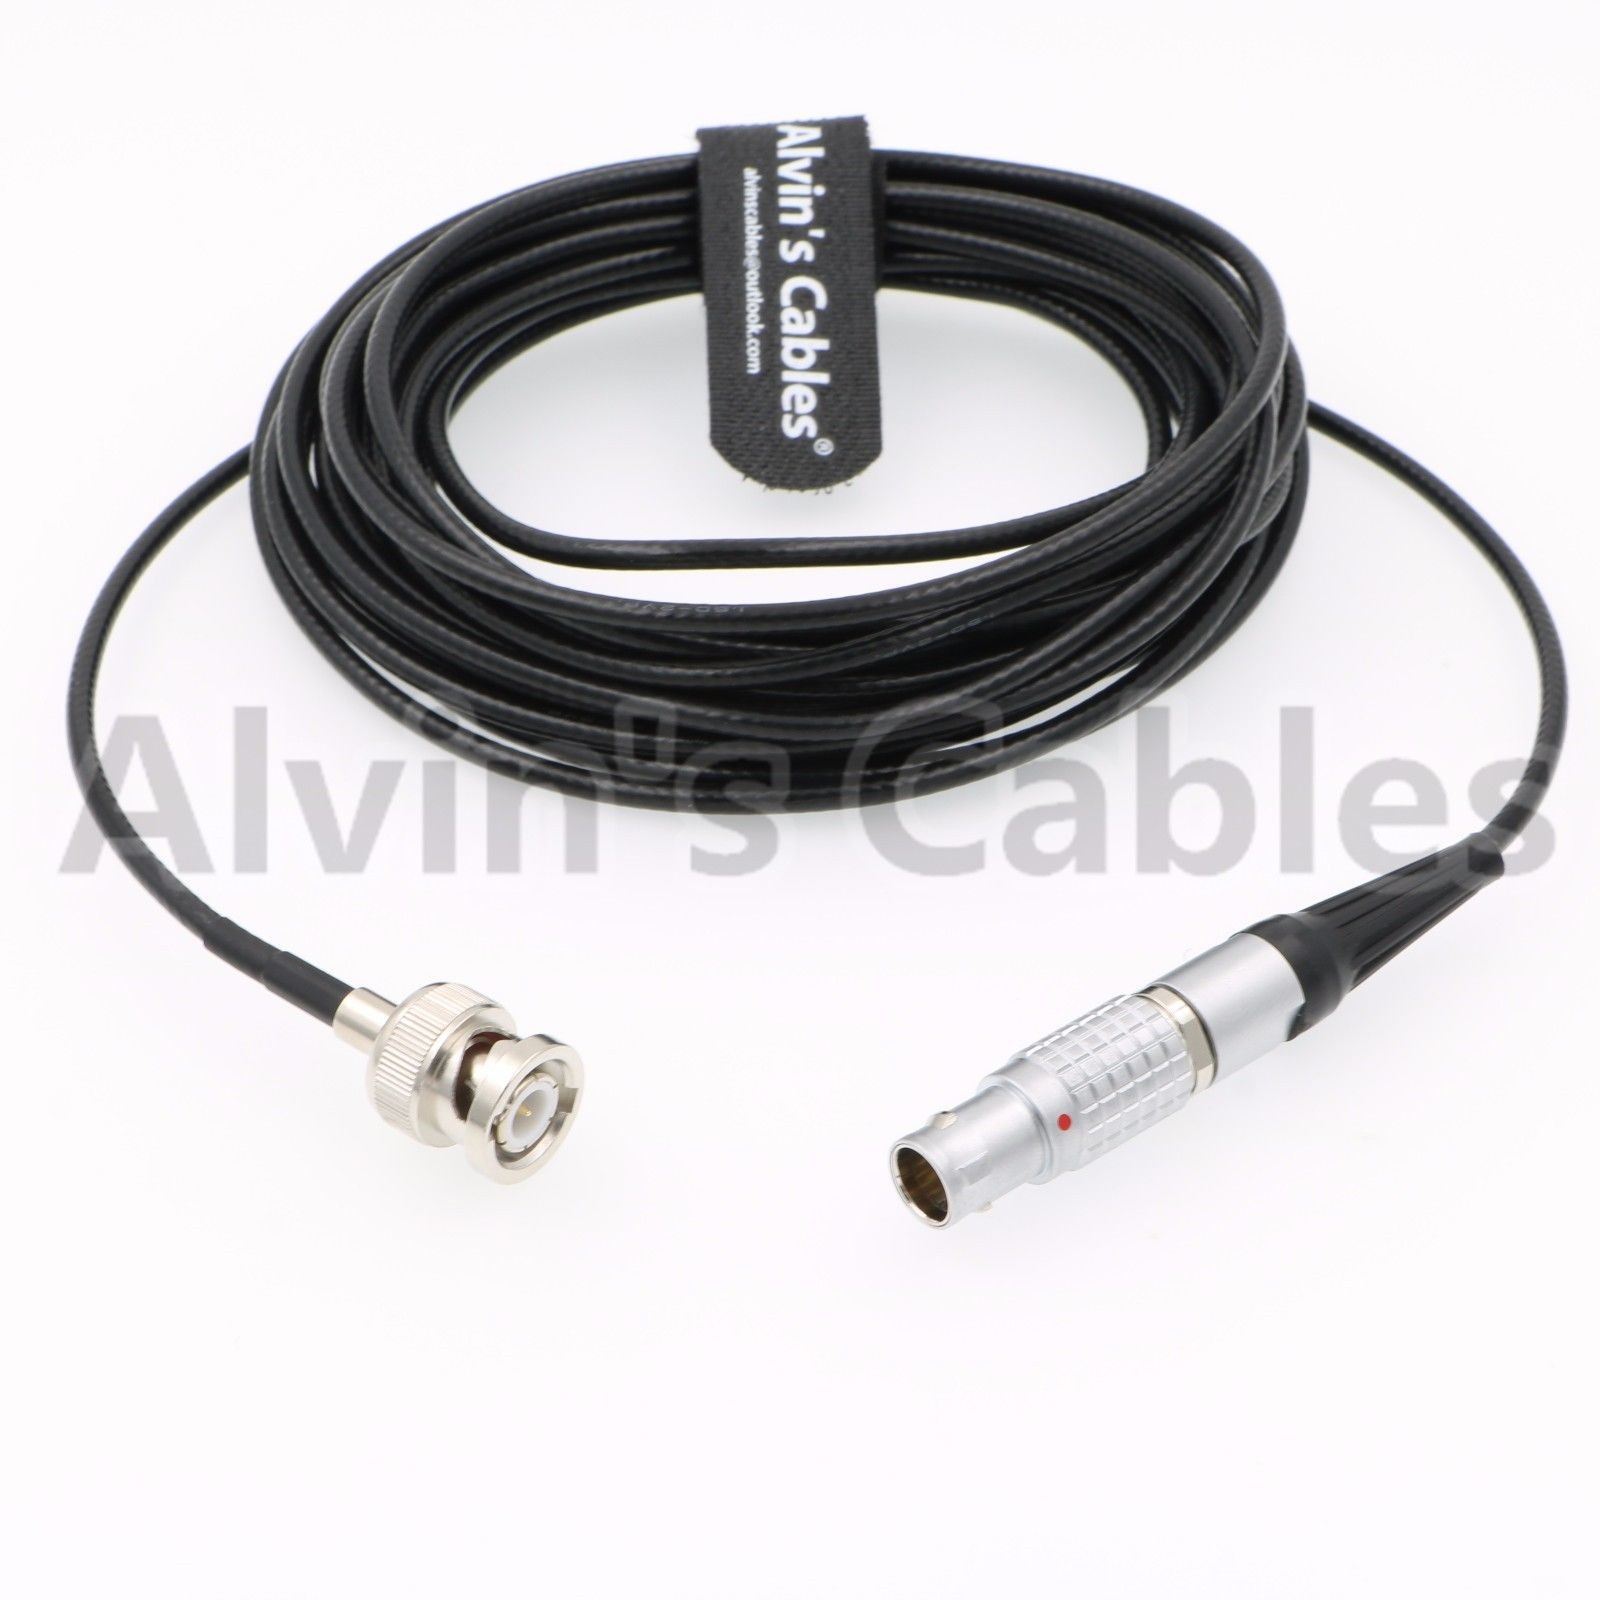 Wholesale Nor1438 Camera Run Stop Cable BNC To Lemo 7 Pin For F-Stop / Bartech from china suppliers